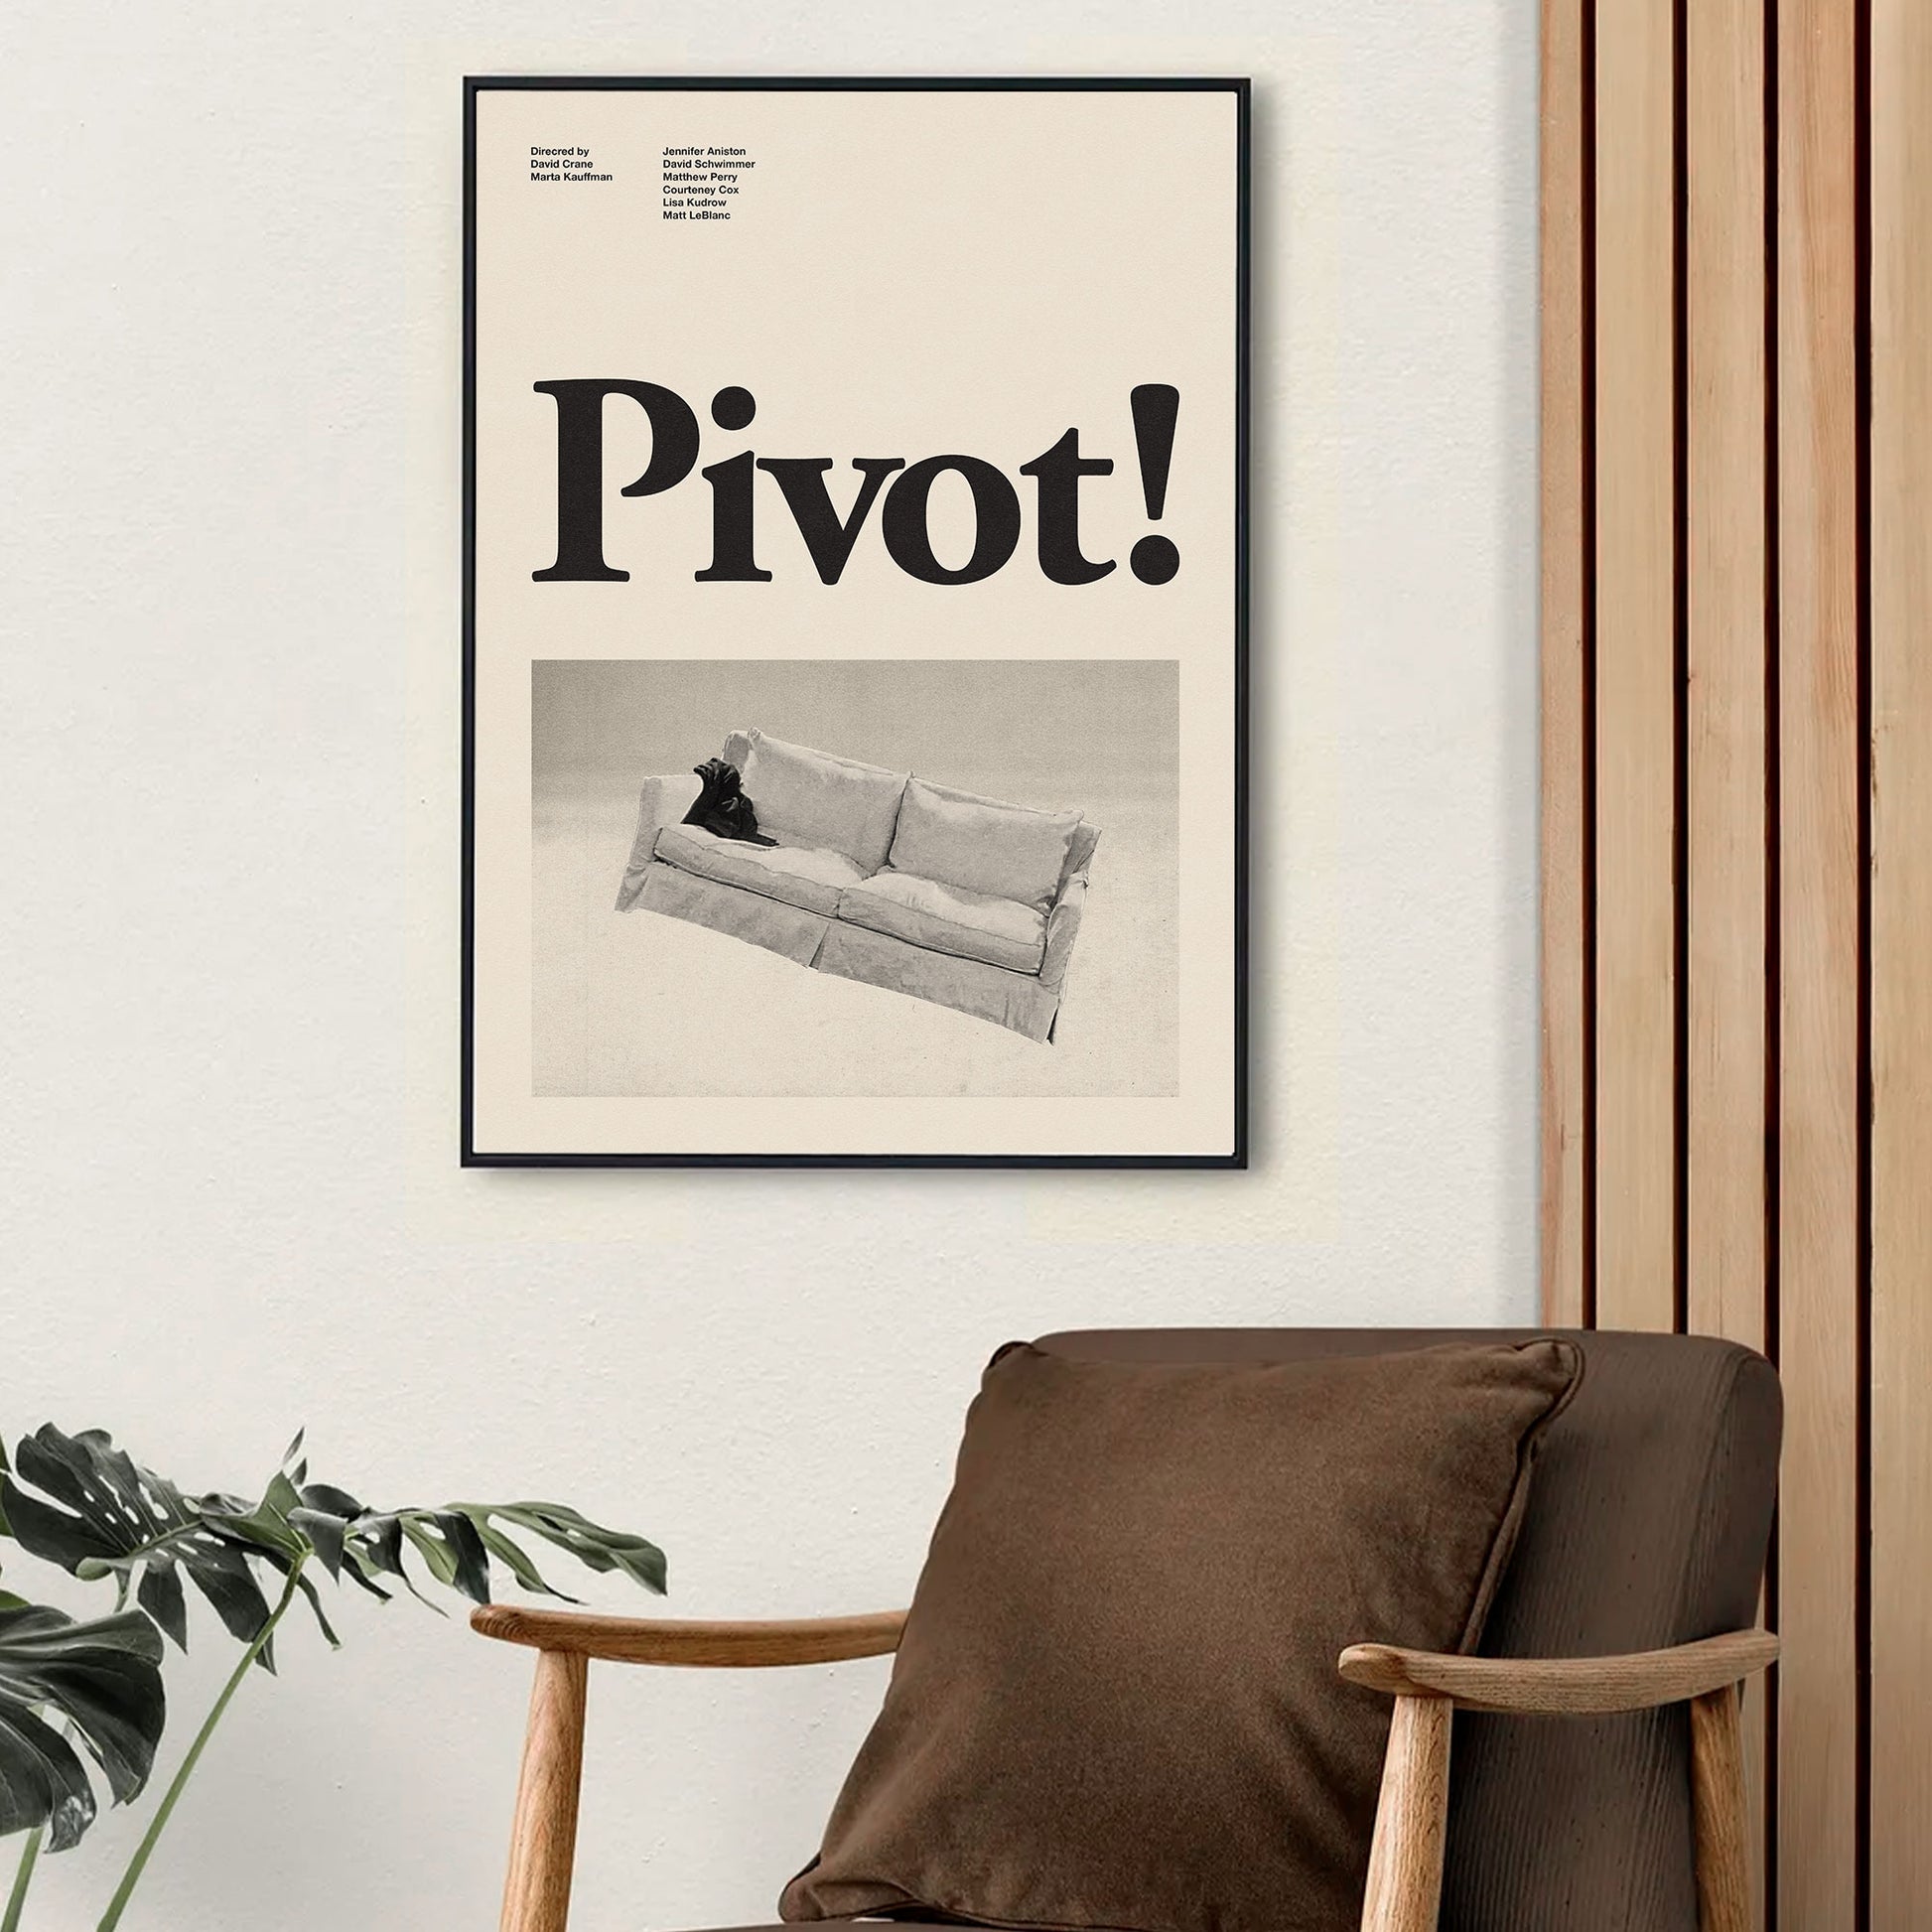 A minimalist mid century modern art print featuring the word "pivot" from the television series friends in black and white hanging on the wall